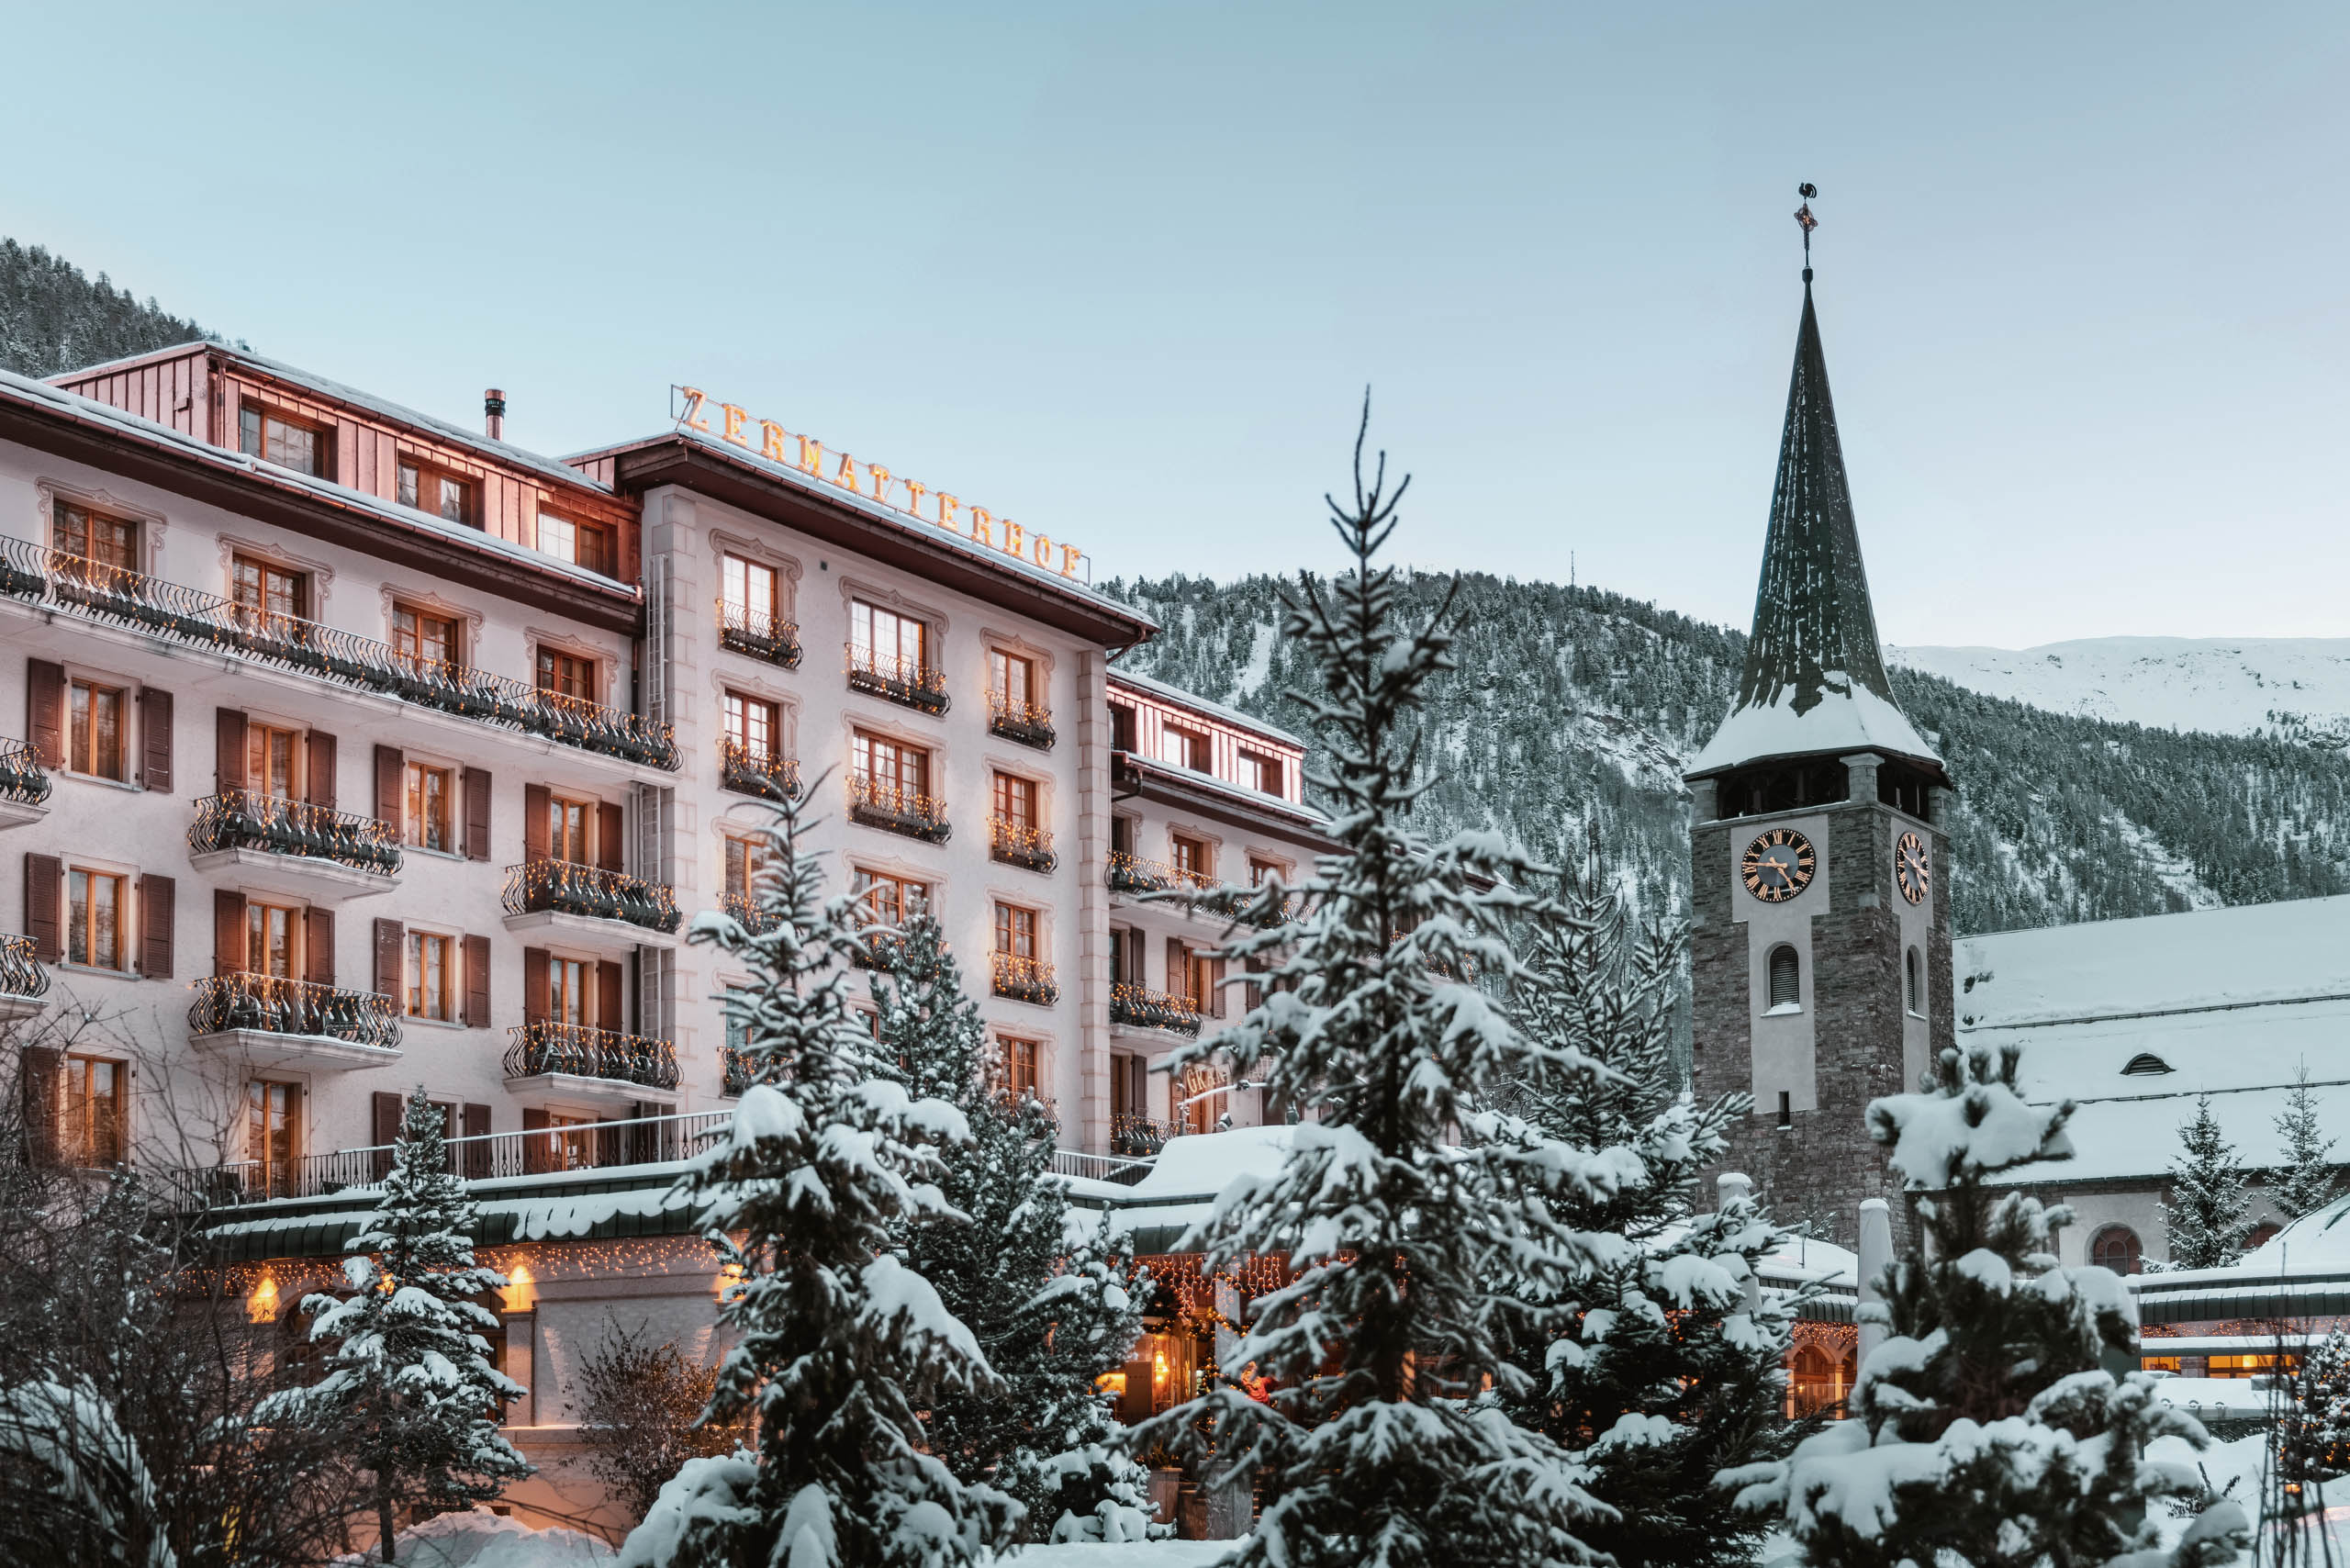 Swiss Deluxe Hotels Stories Winter 2021 Precious Moments 01 DANUSER 171218174035 V193 Bearb Ecirgb